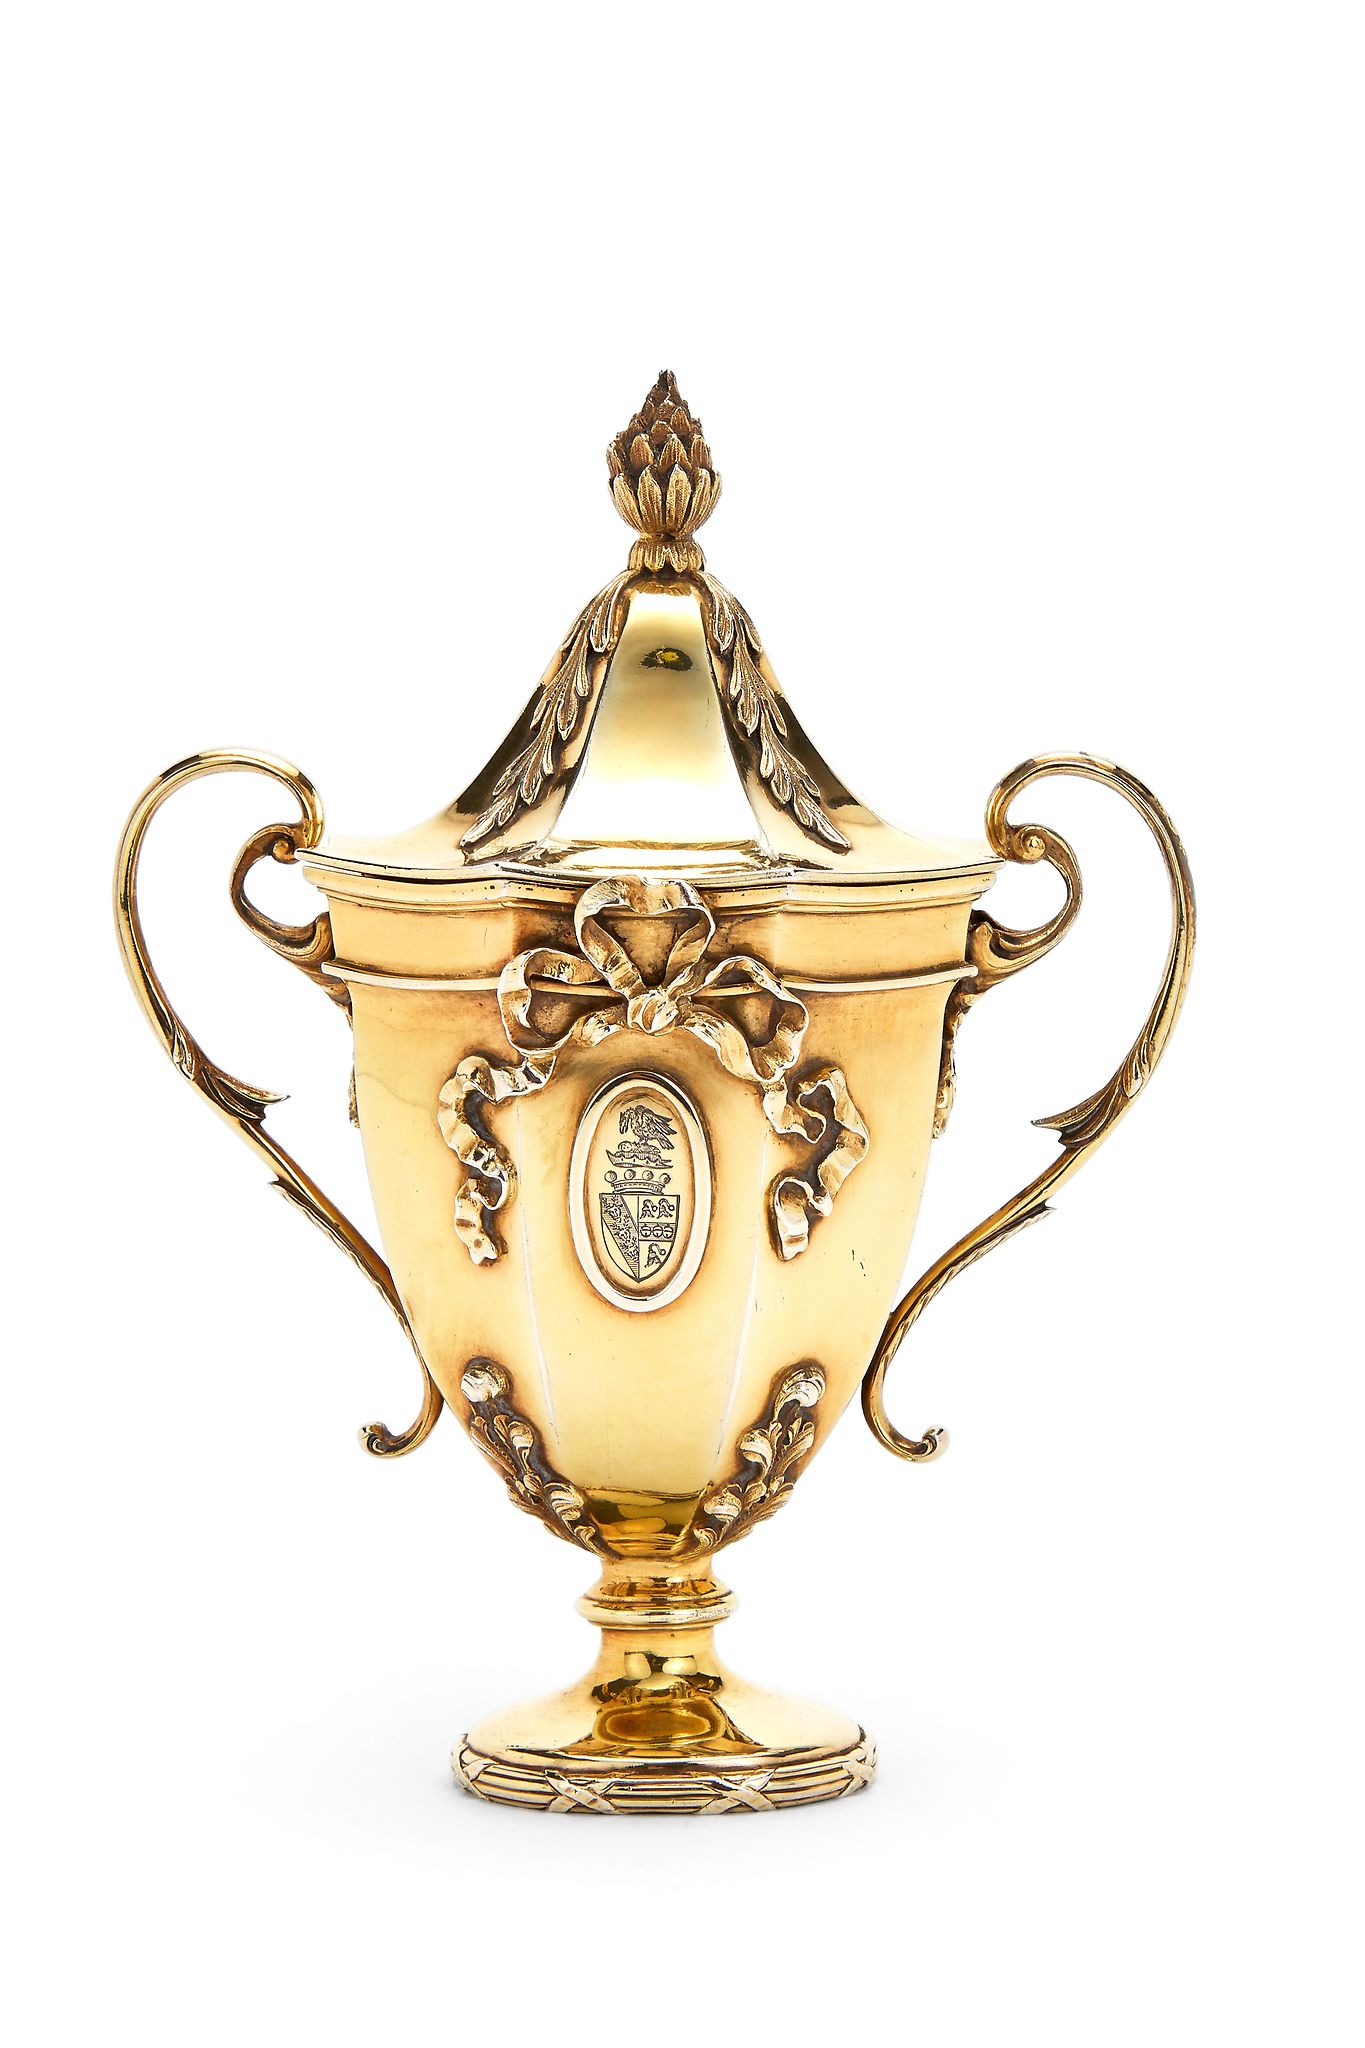 An Edwardian silver gilt cup and cover by George Fox, London 1903, with a pine cone finial to the - Image 2 of 2